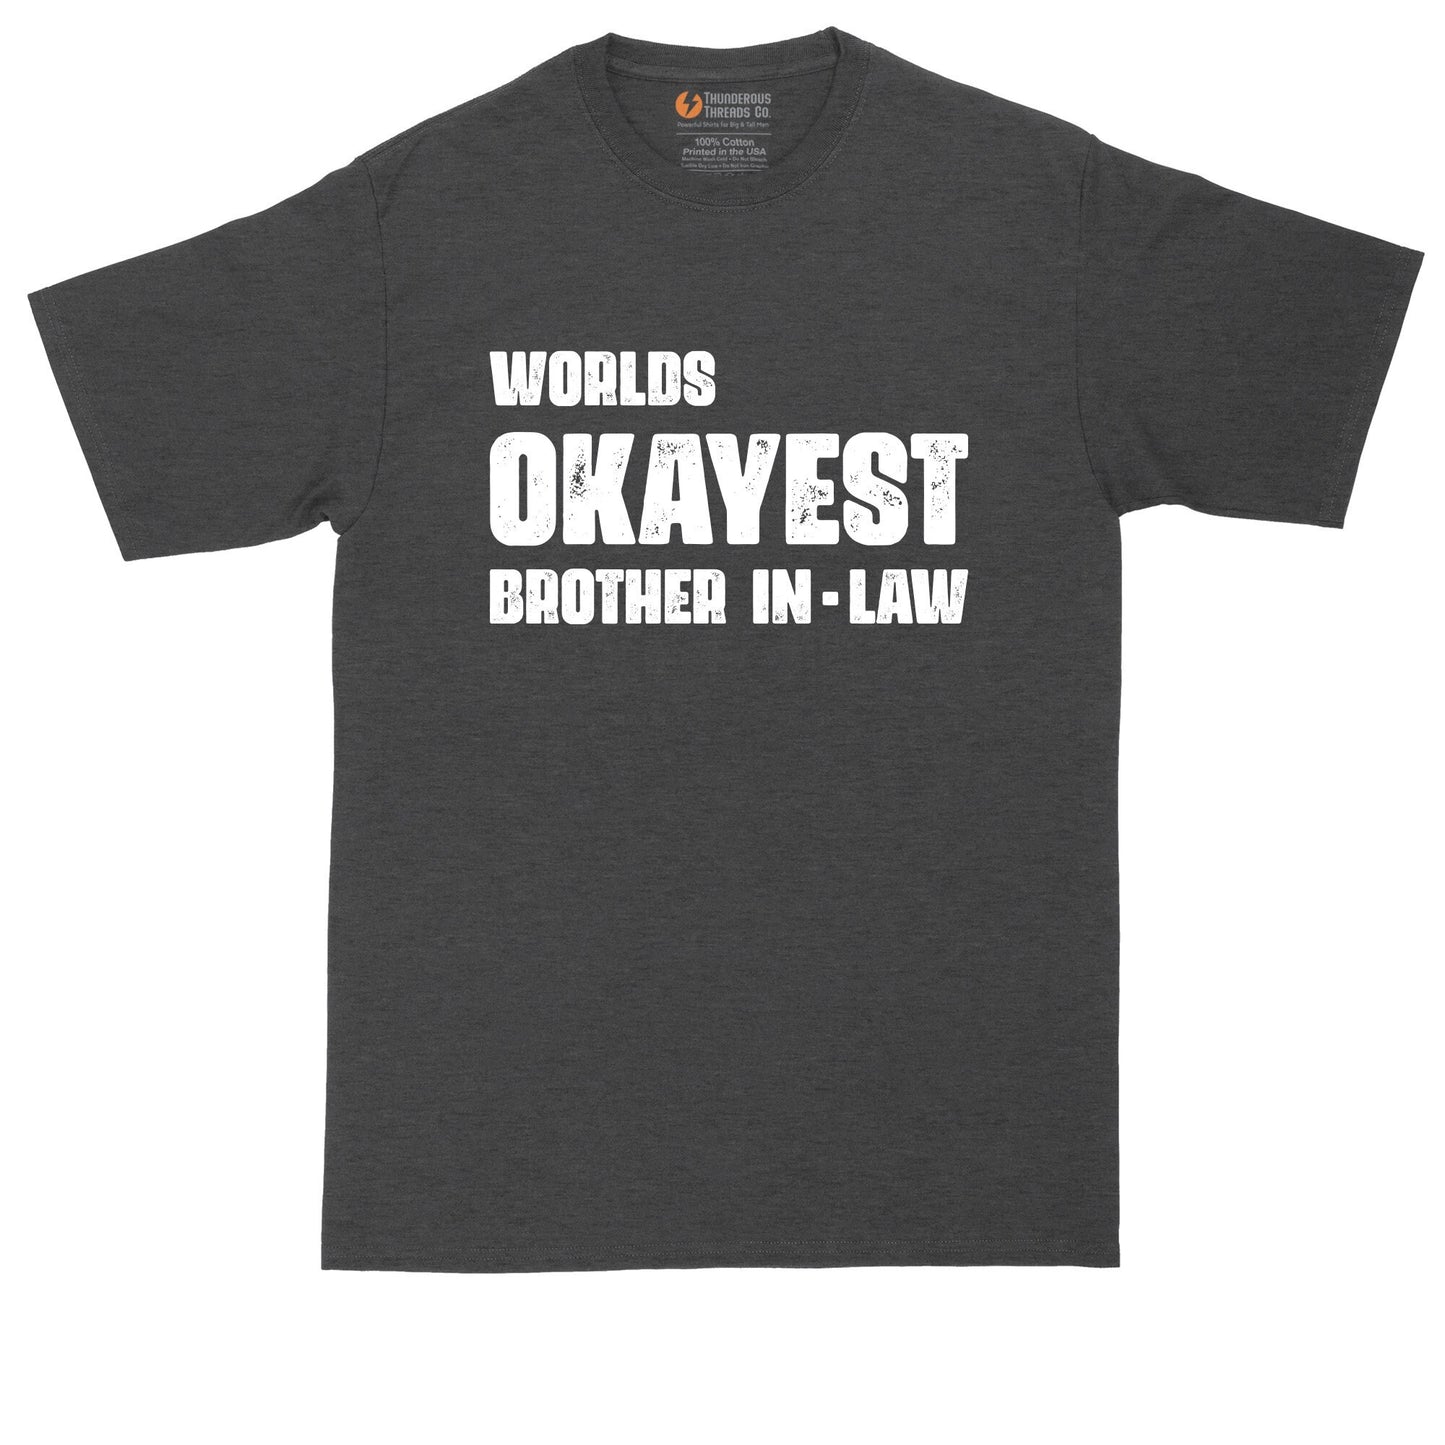 Worlds Okayest Brother In Law | Funny Shirt | Mens Big & Tall T-Shirt